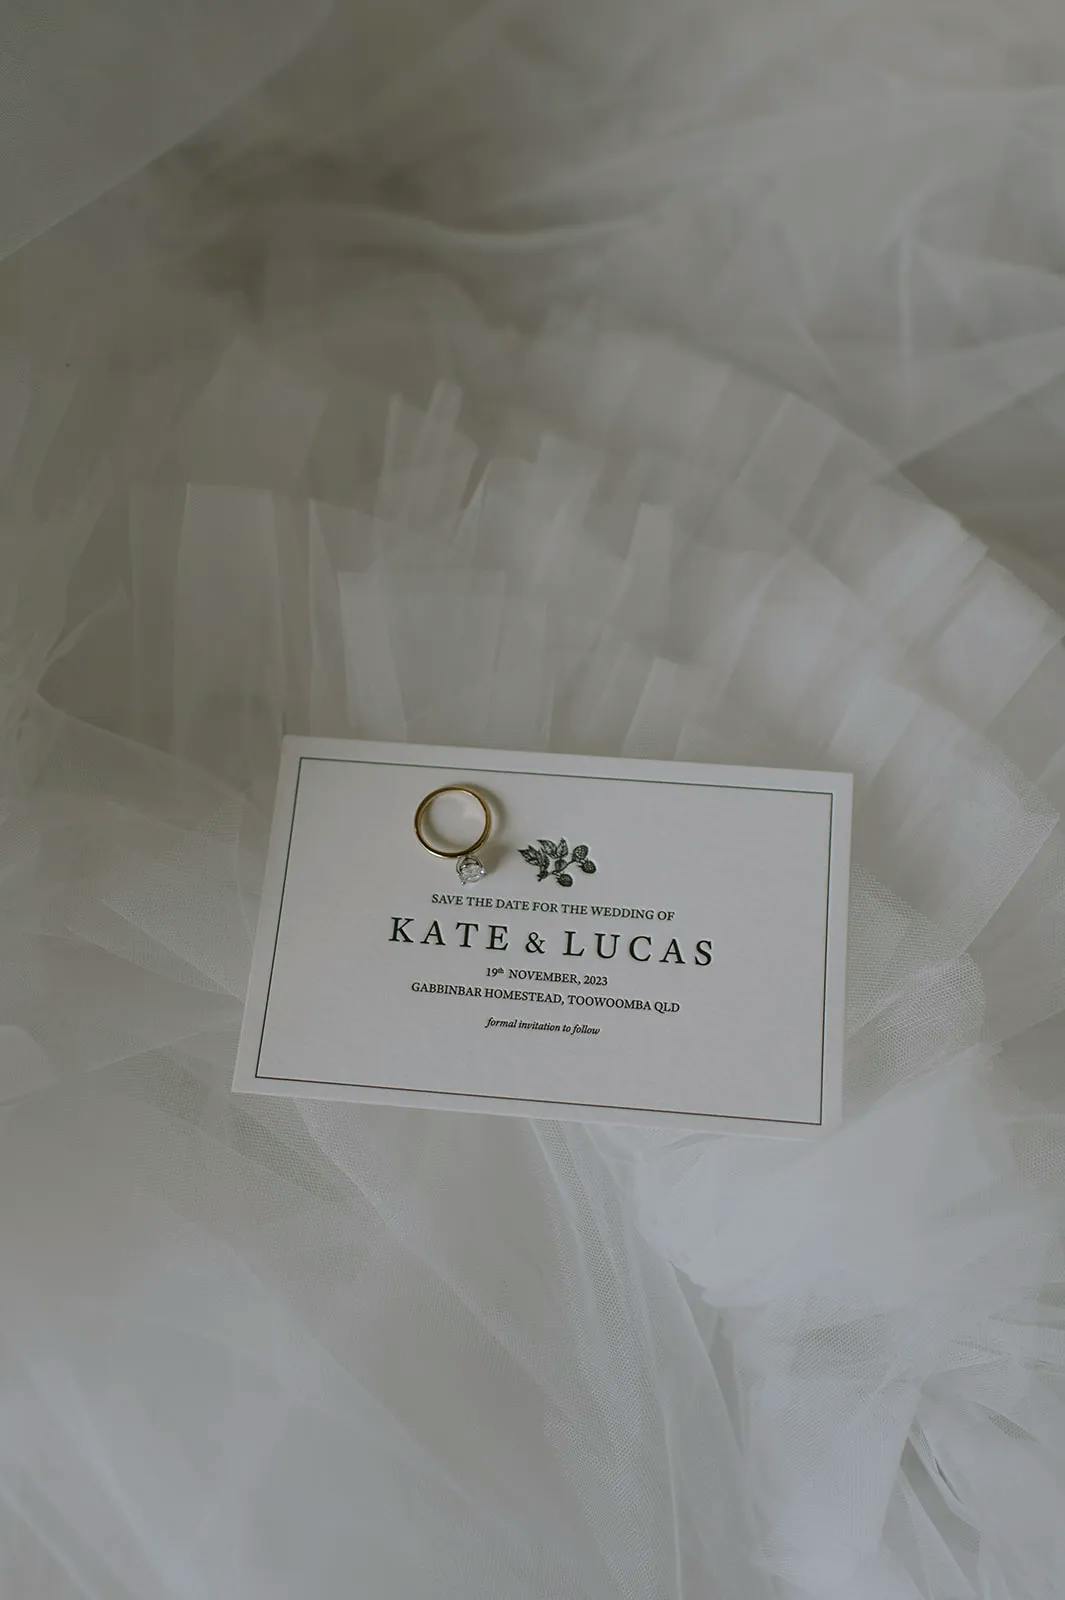 A gold wedding ring is placed on a "Save the Date" card. The card, set on a soft, flowing tulle background, announces the wedding of Kate and Lucas on 18 November 2023 at Gabbinbar Homestead, Toowoomba, QLD.